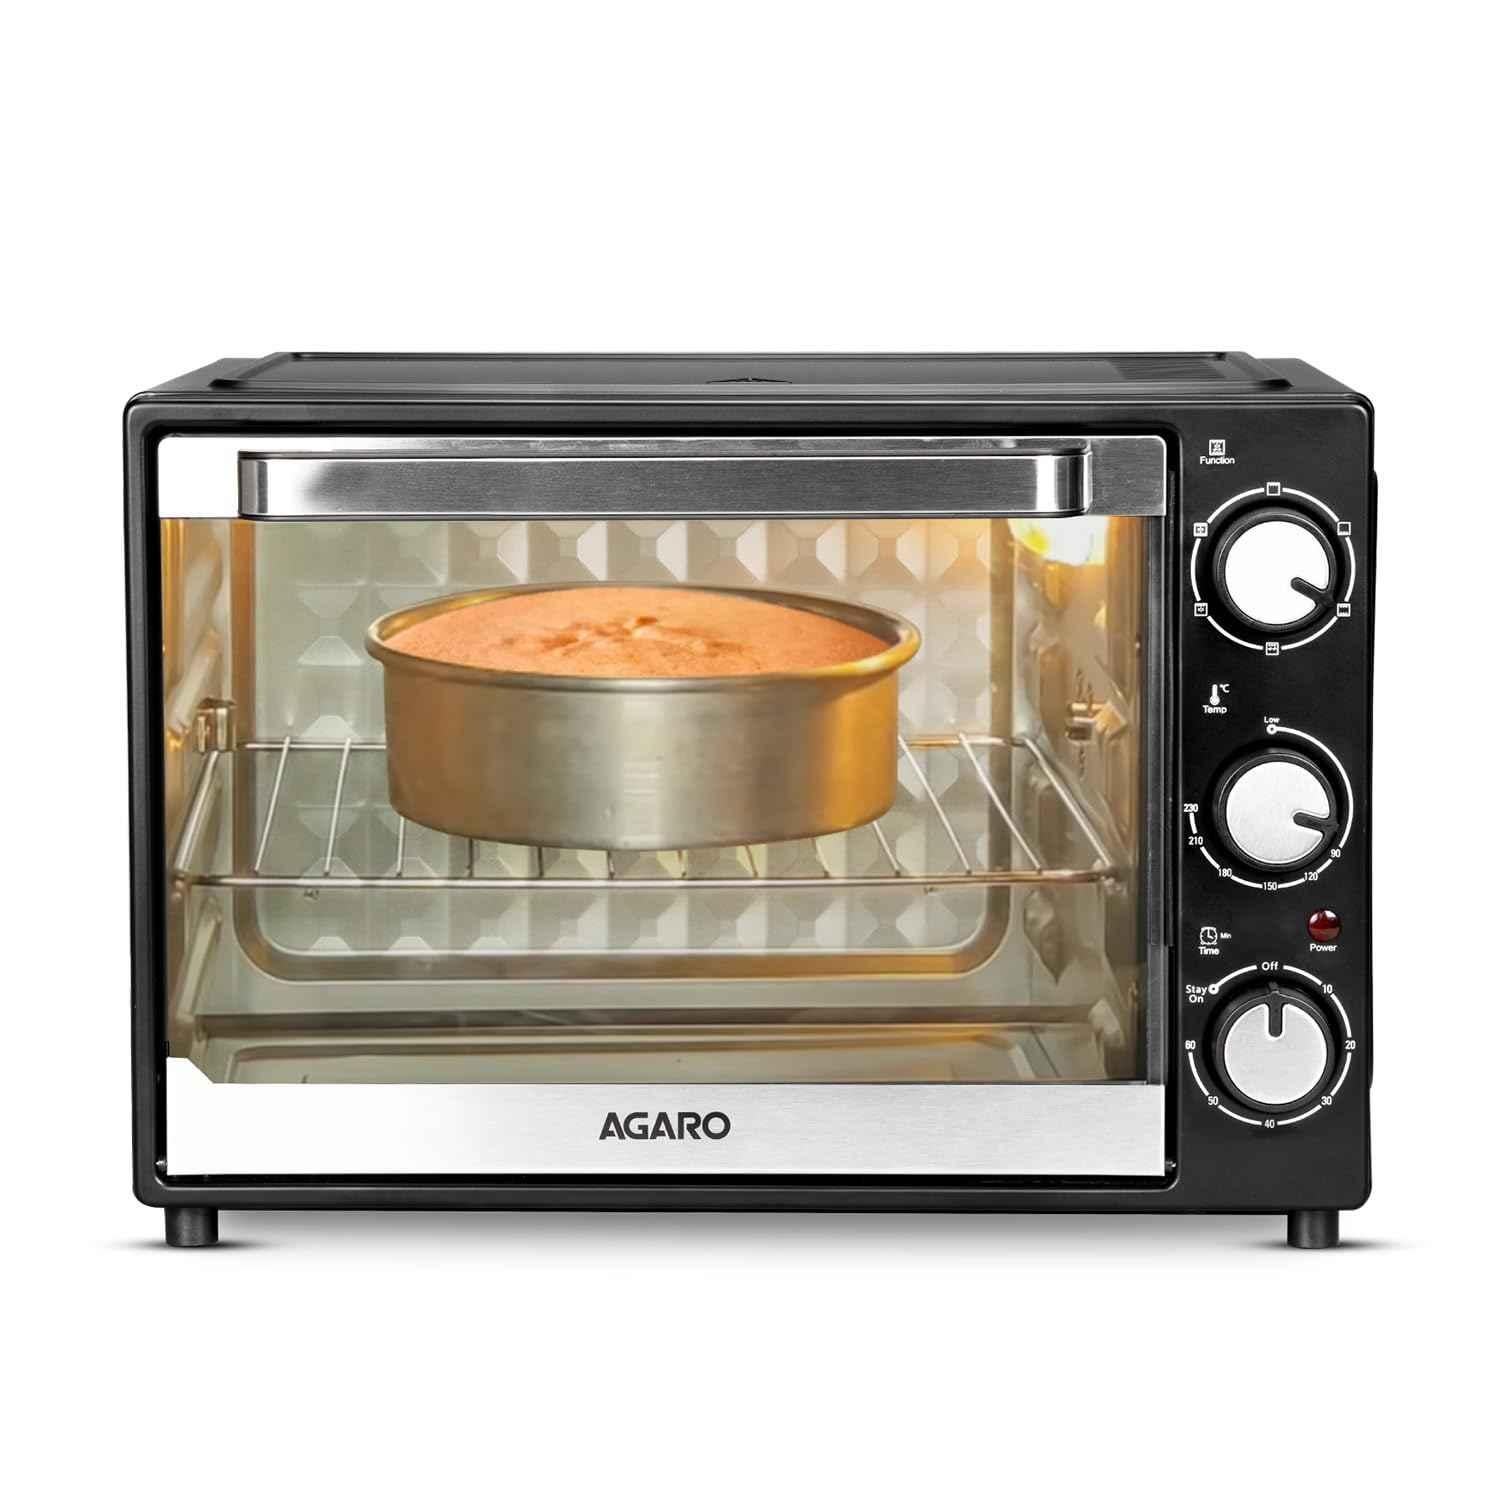 The Ultimate Guide On How To Bake Cake In A Convection Oven